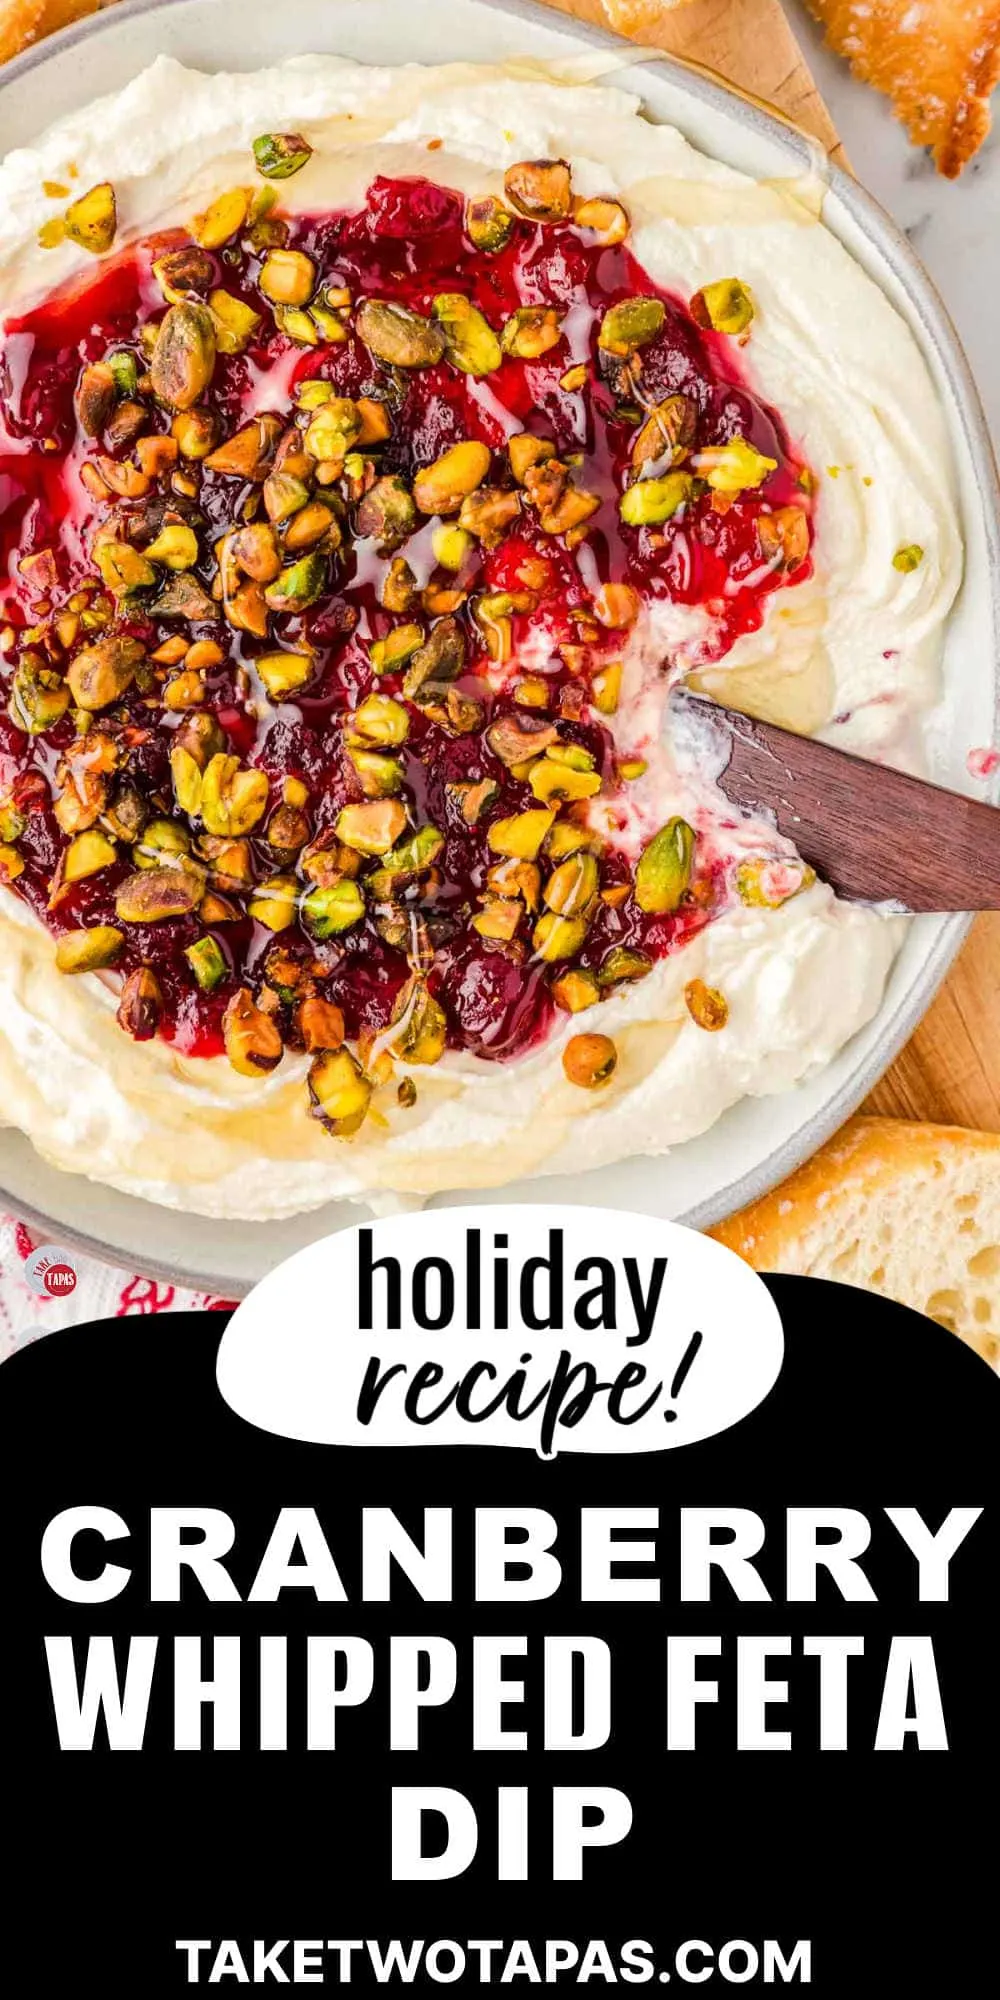 cranberry whipped feta dip is the perfect holiday appetizer